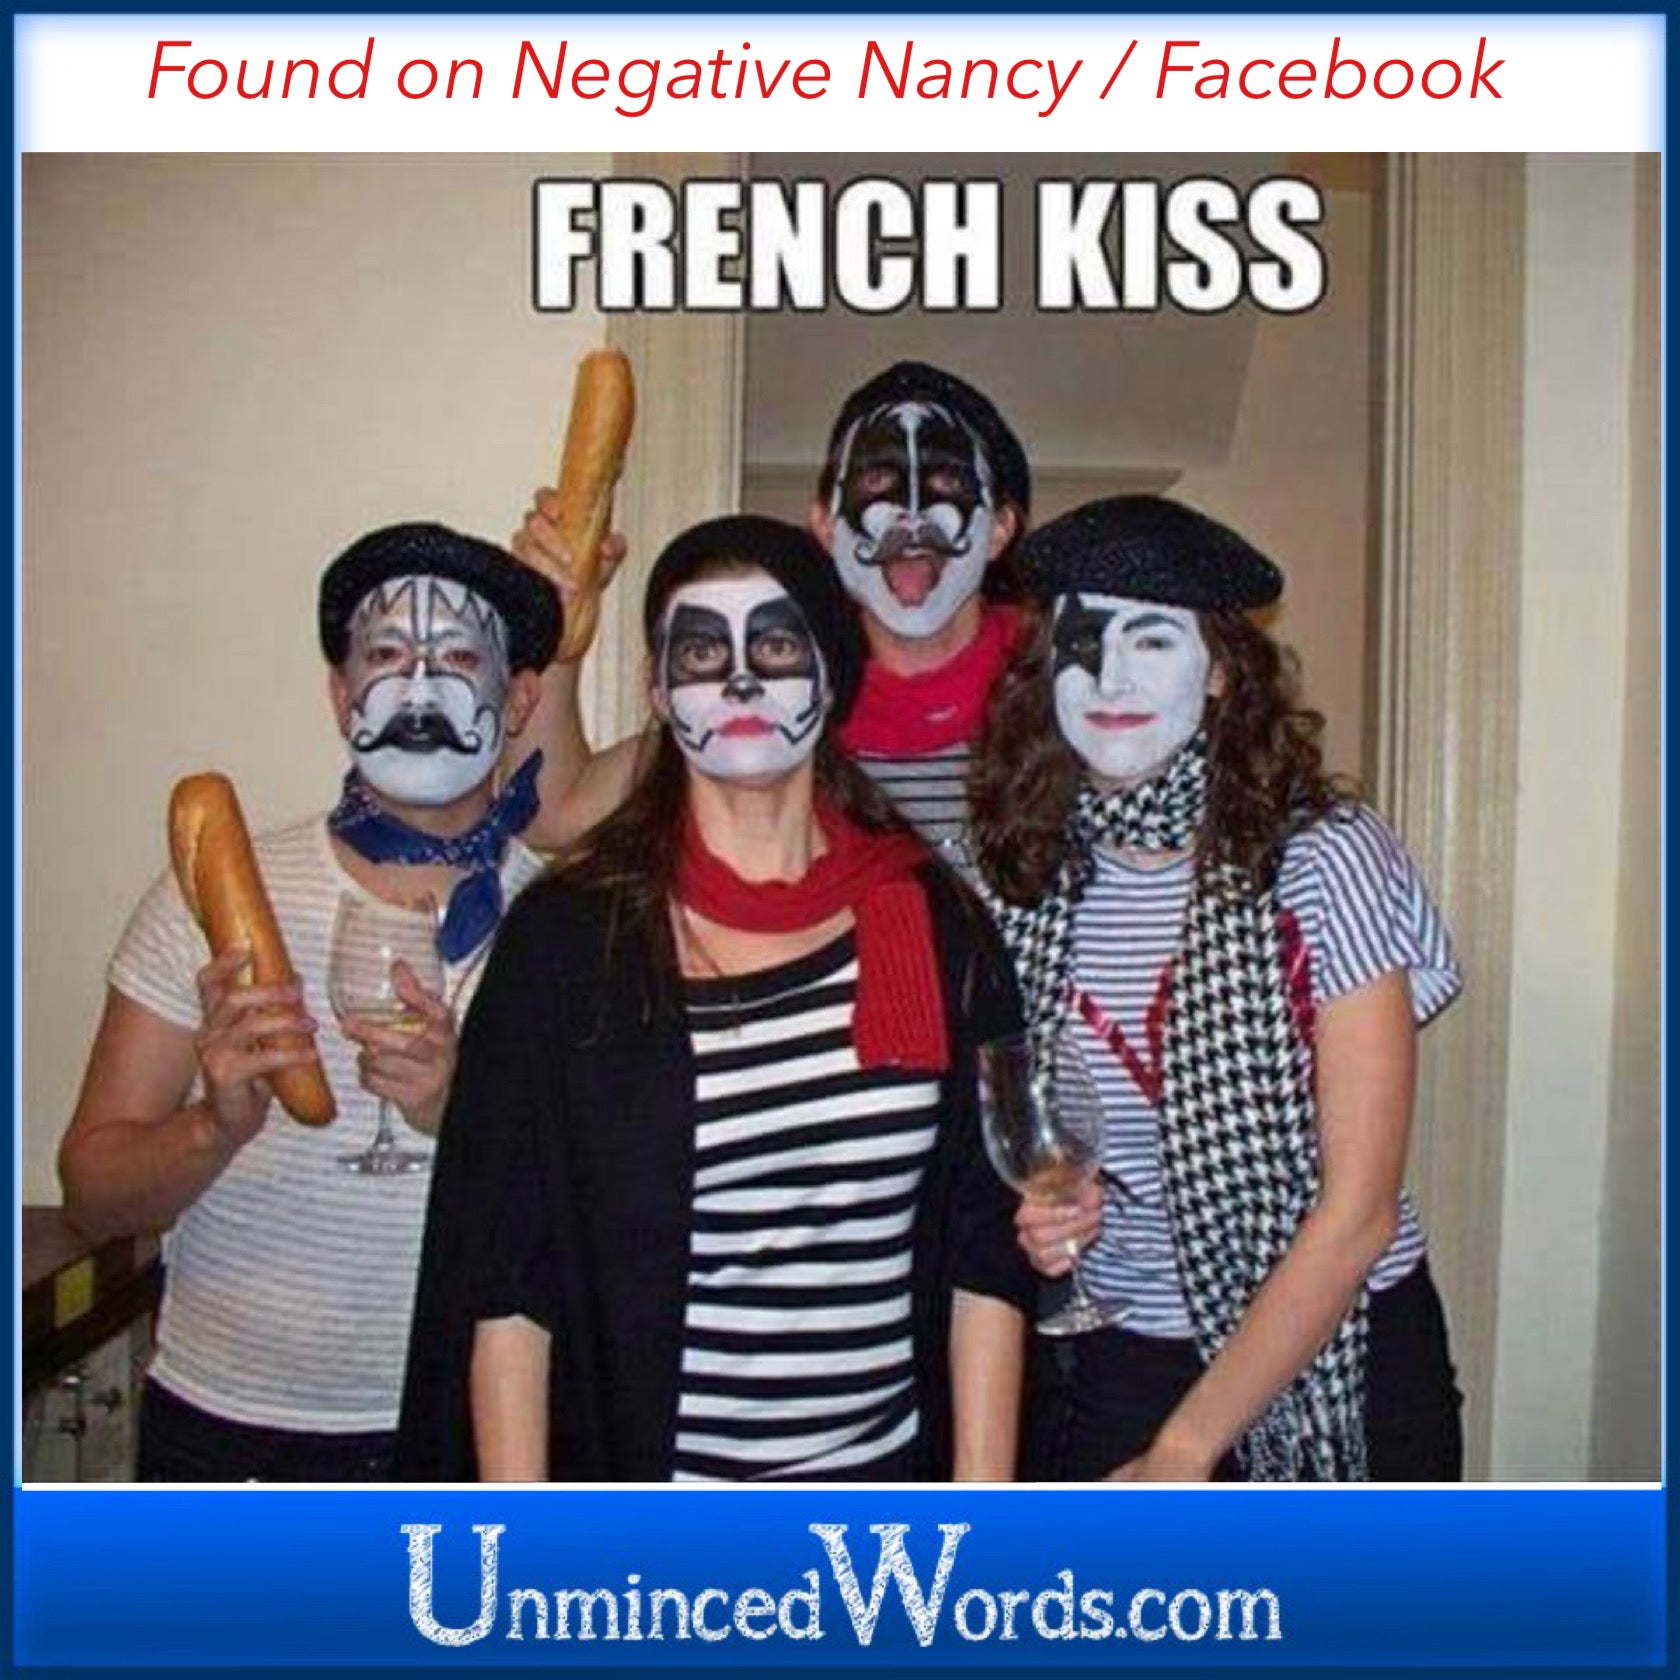 French Kiss meme may surprise you